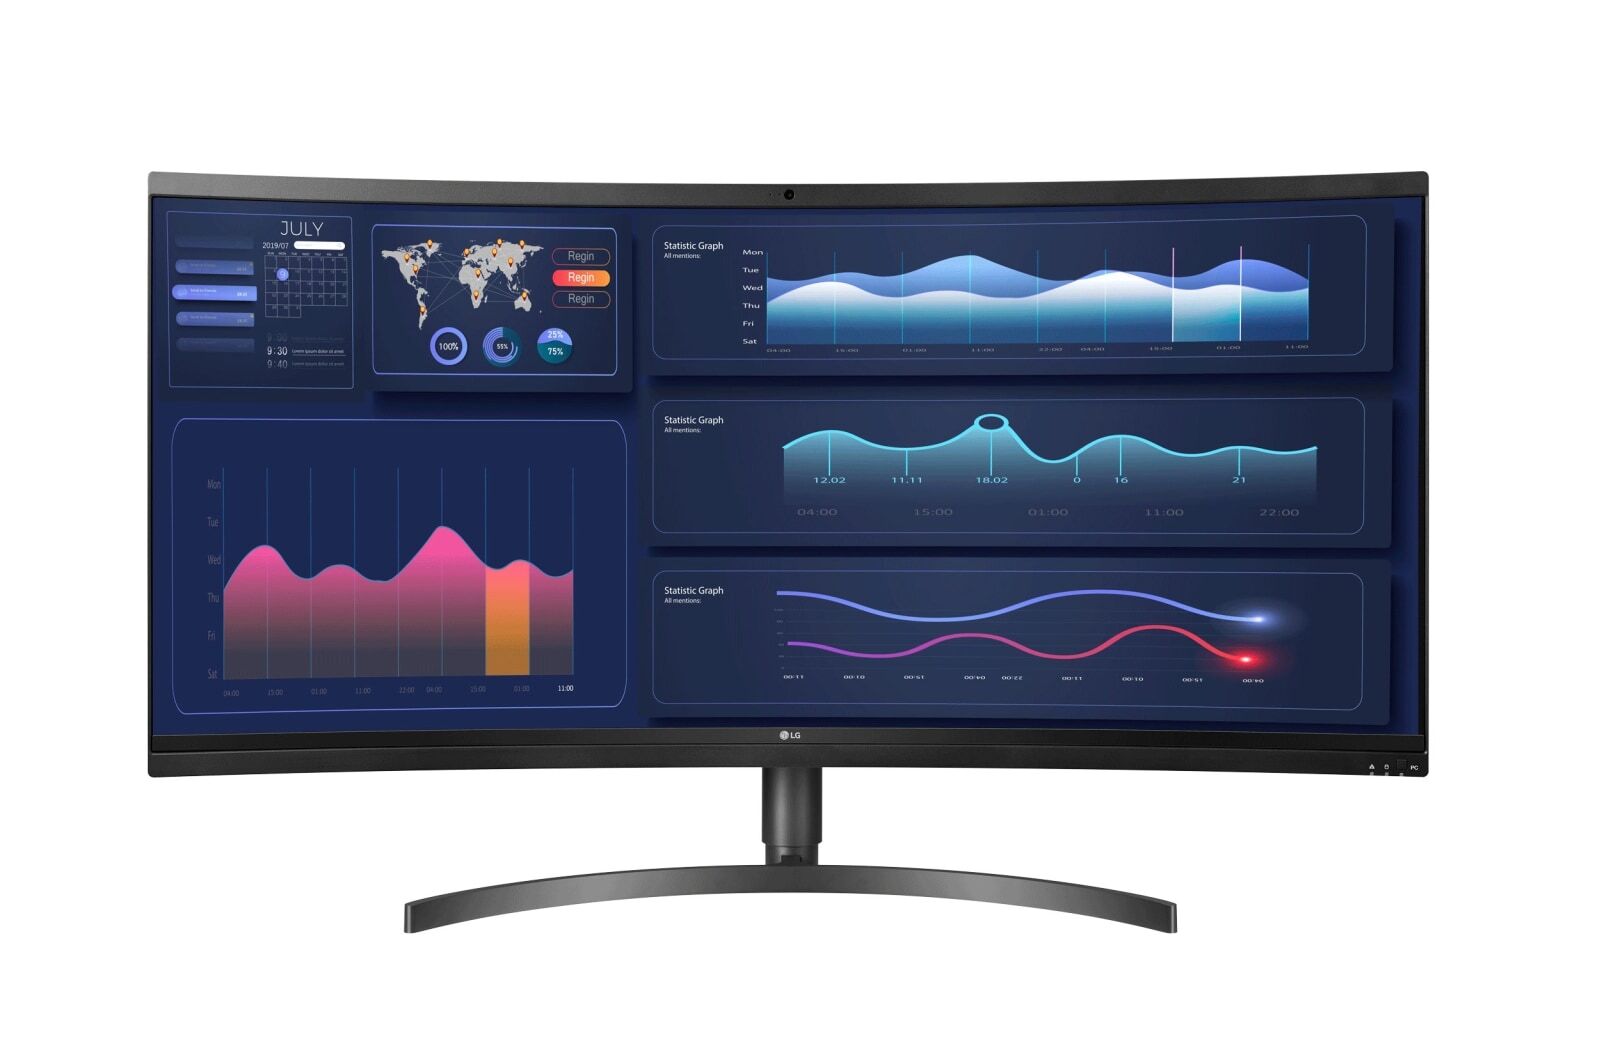 CommericalDisplayWorks.co.uk LG 38CK950N-1C LG 38 inch class Curved UltraWide Thin Client Monitor